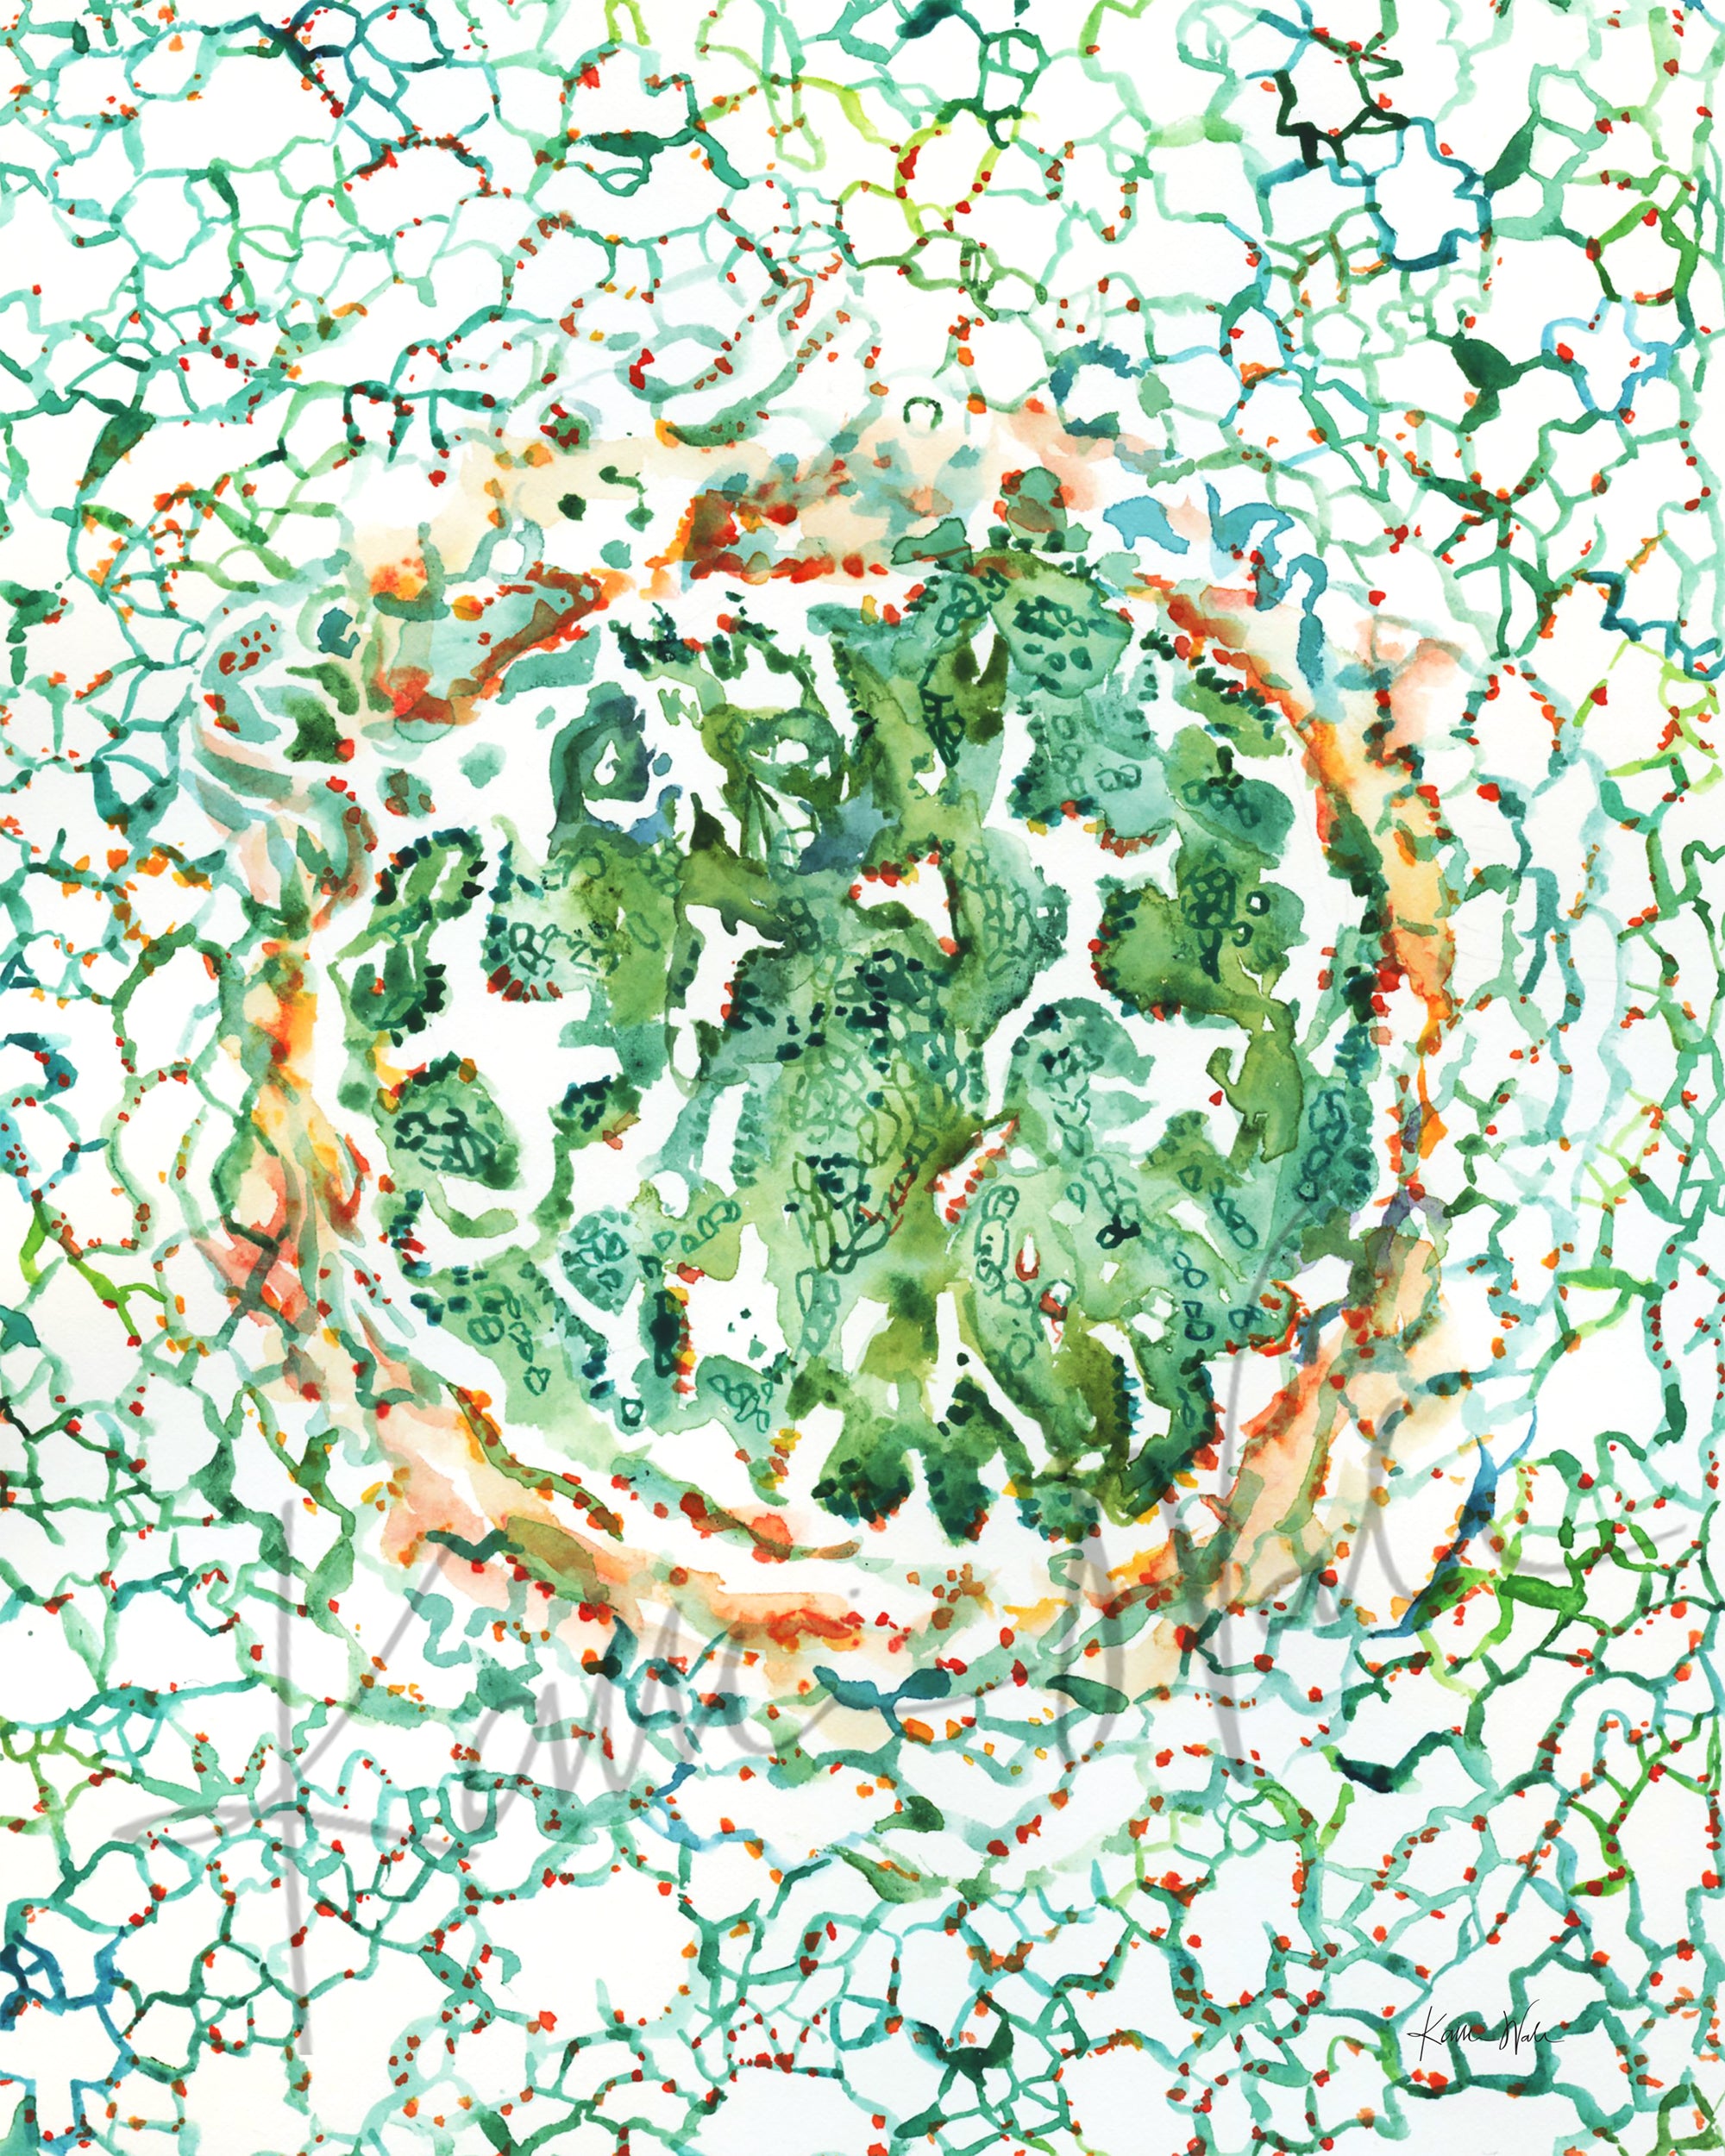 Unframed watercolor painting of adenocarcinoma, with greens, reds, and yellows.